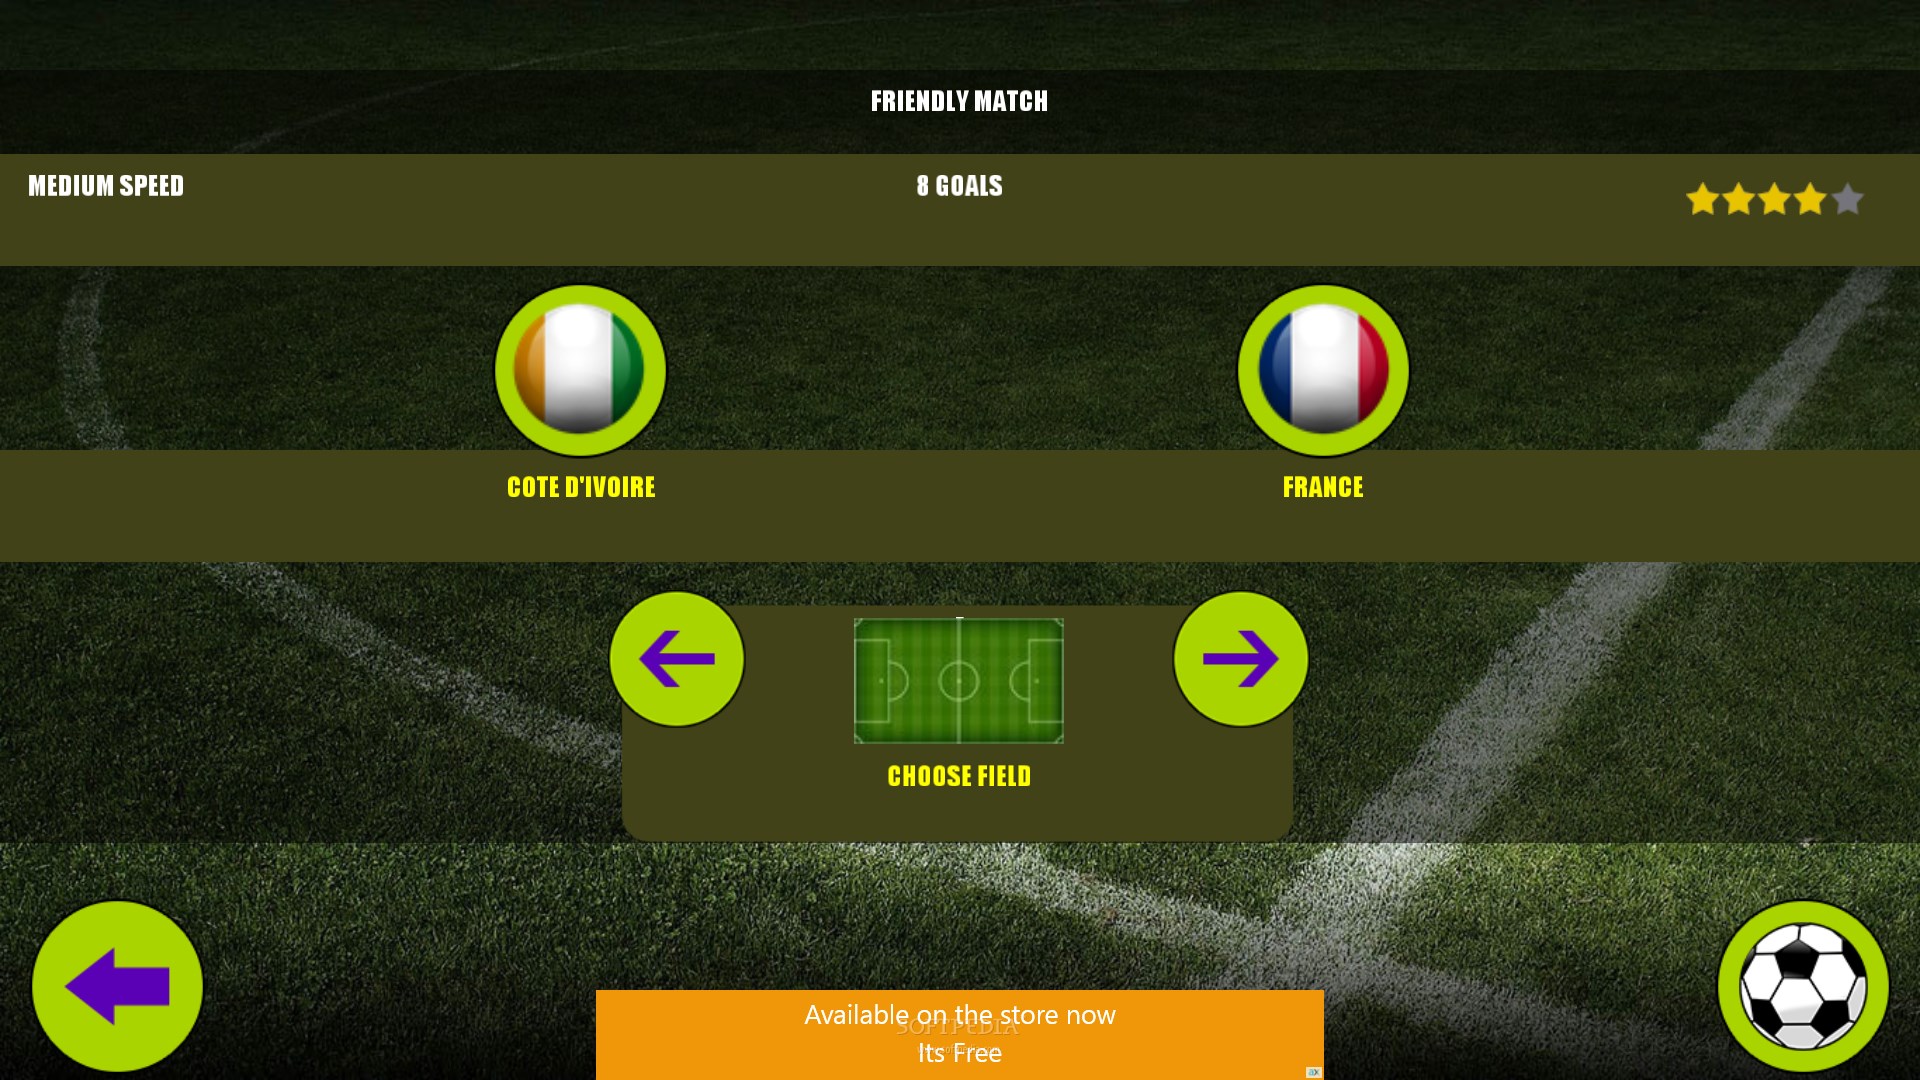 90 Minute Fever - Online Football (Soccer) Manager free instals